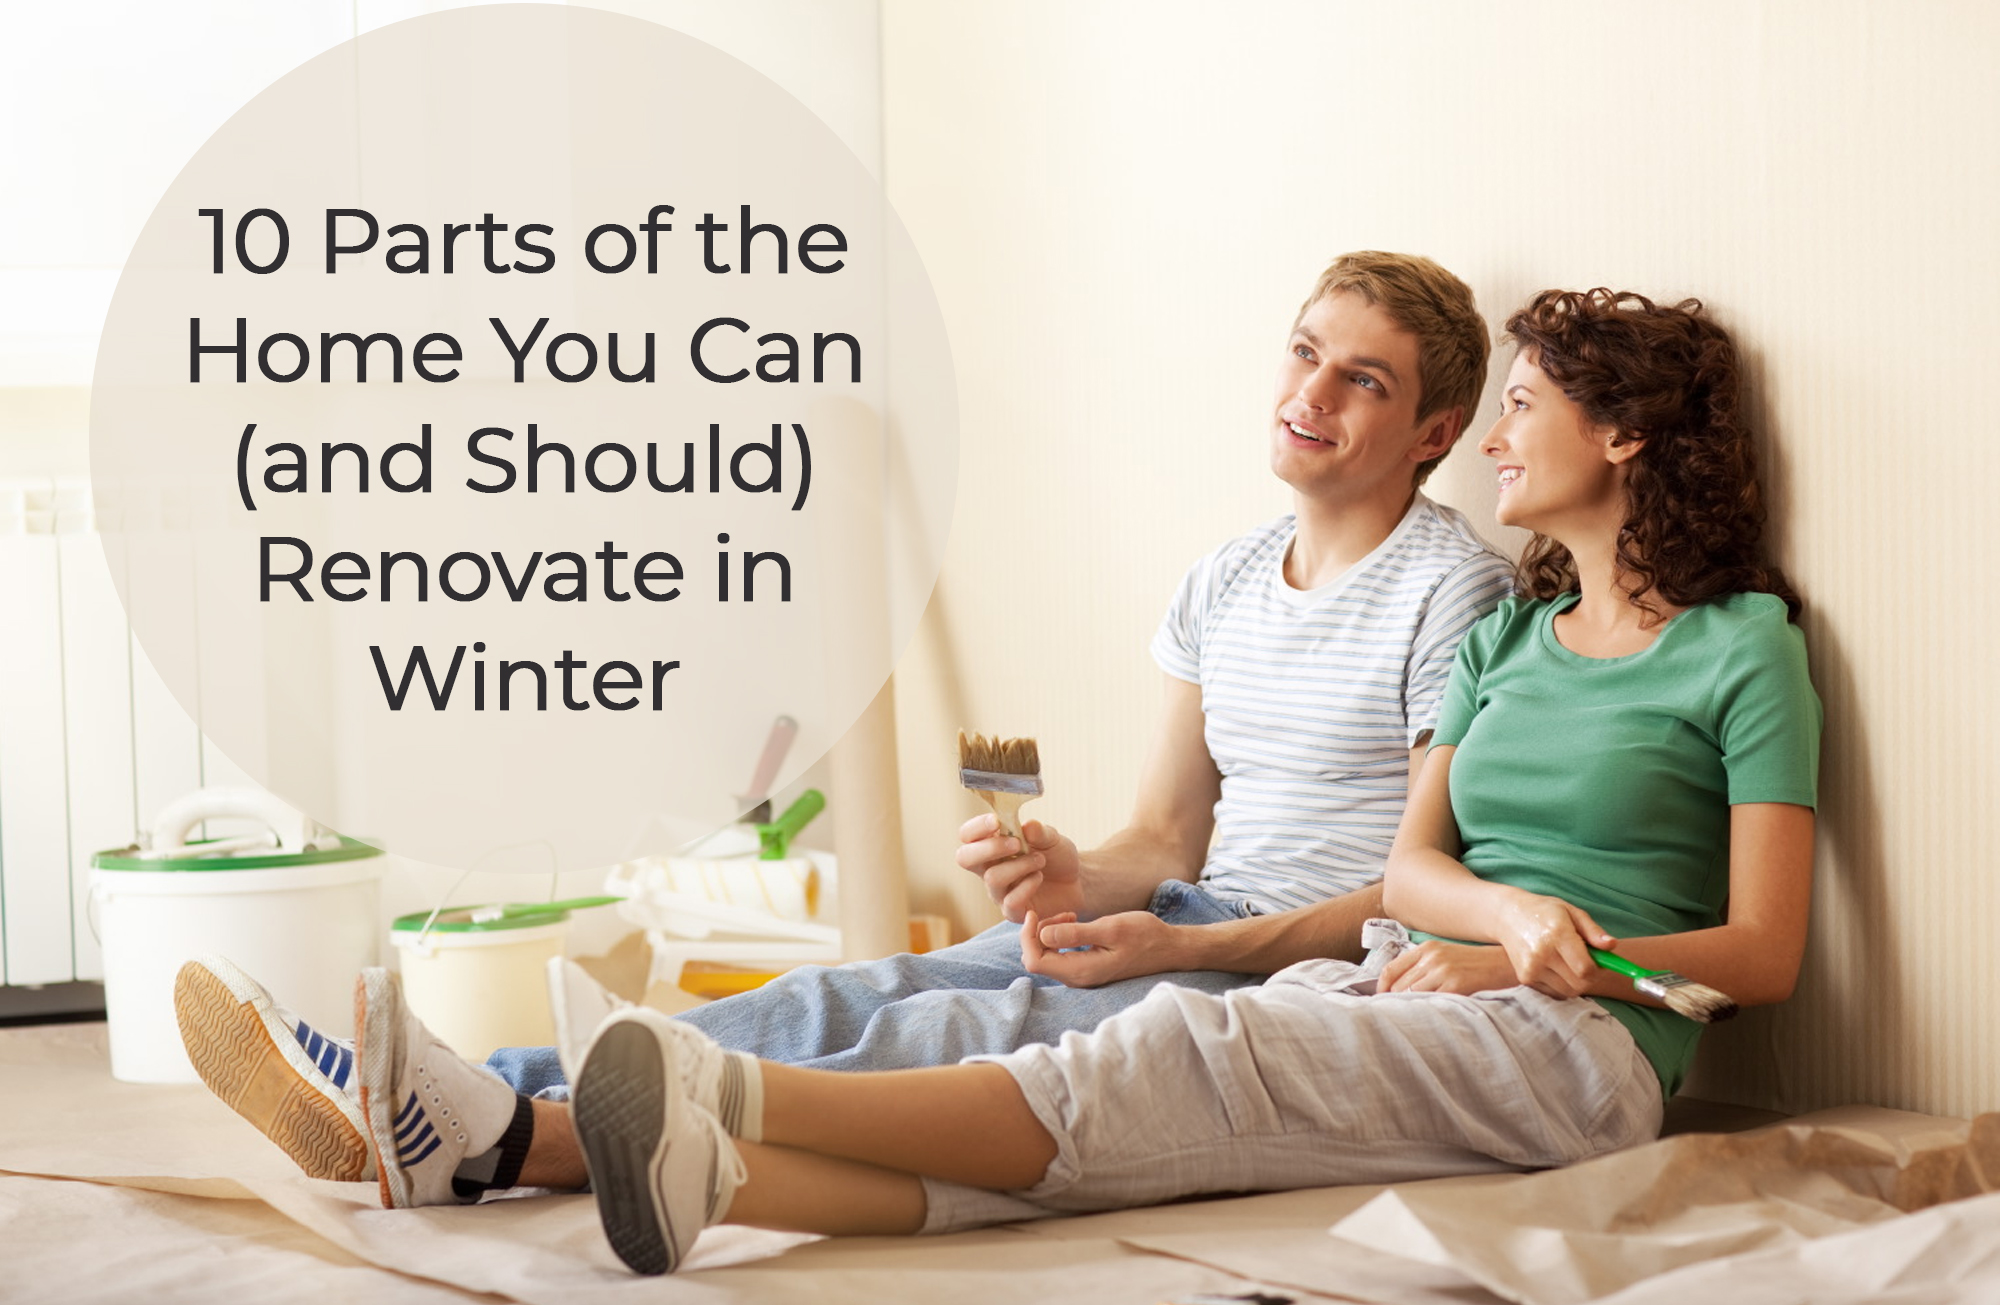 10 Parts of the Home You Can (and Should) Renovate in Winter